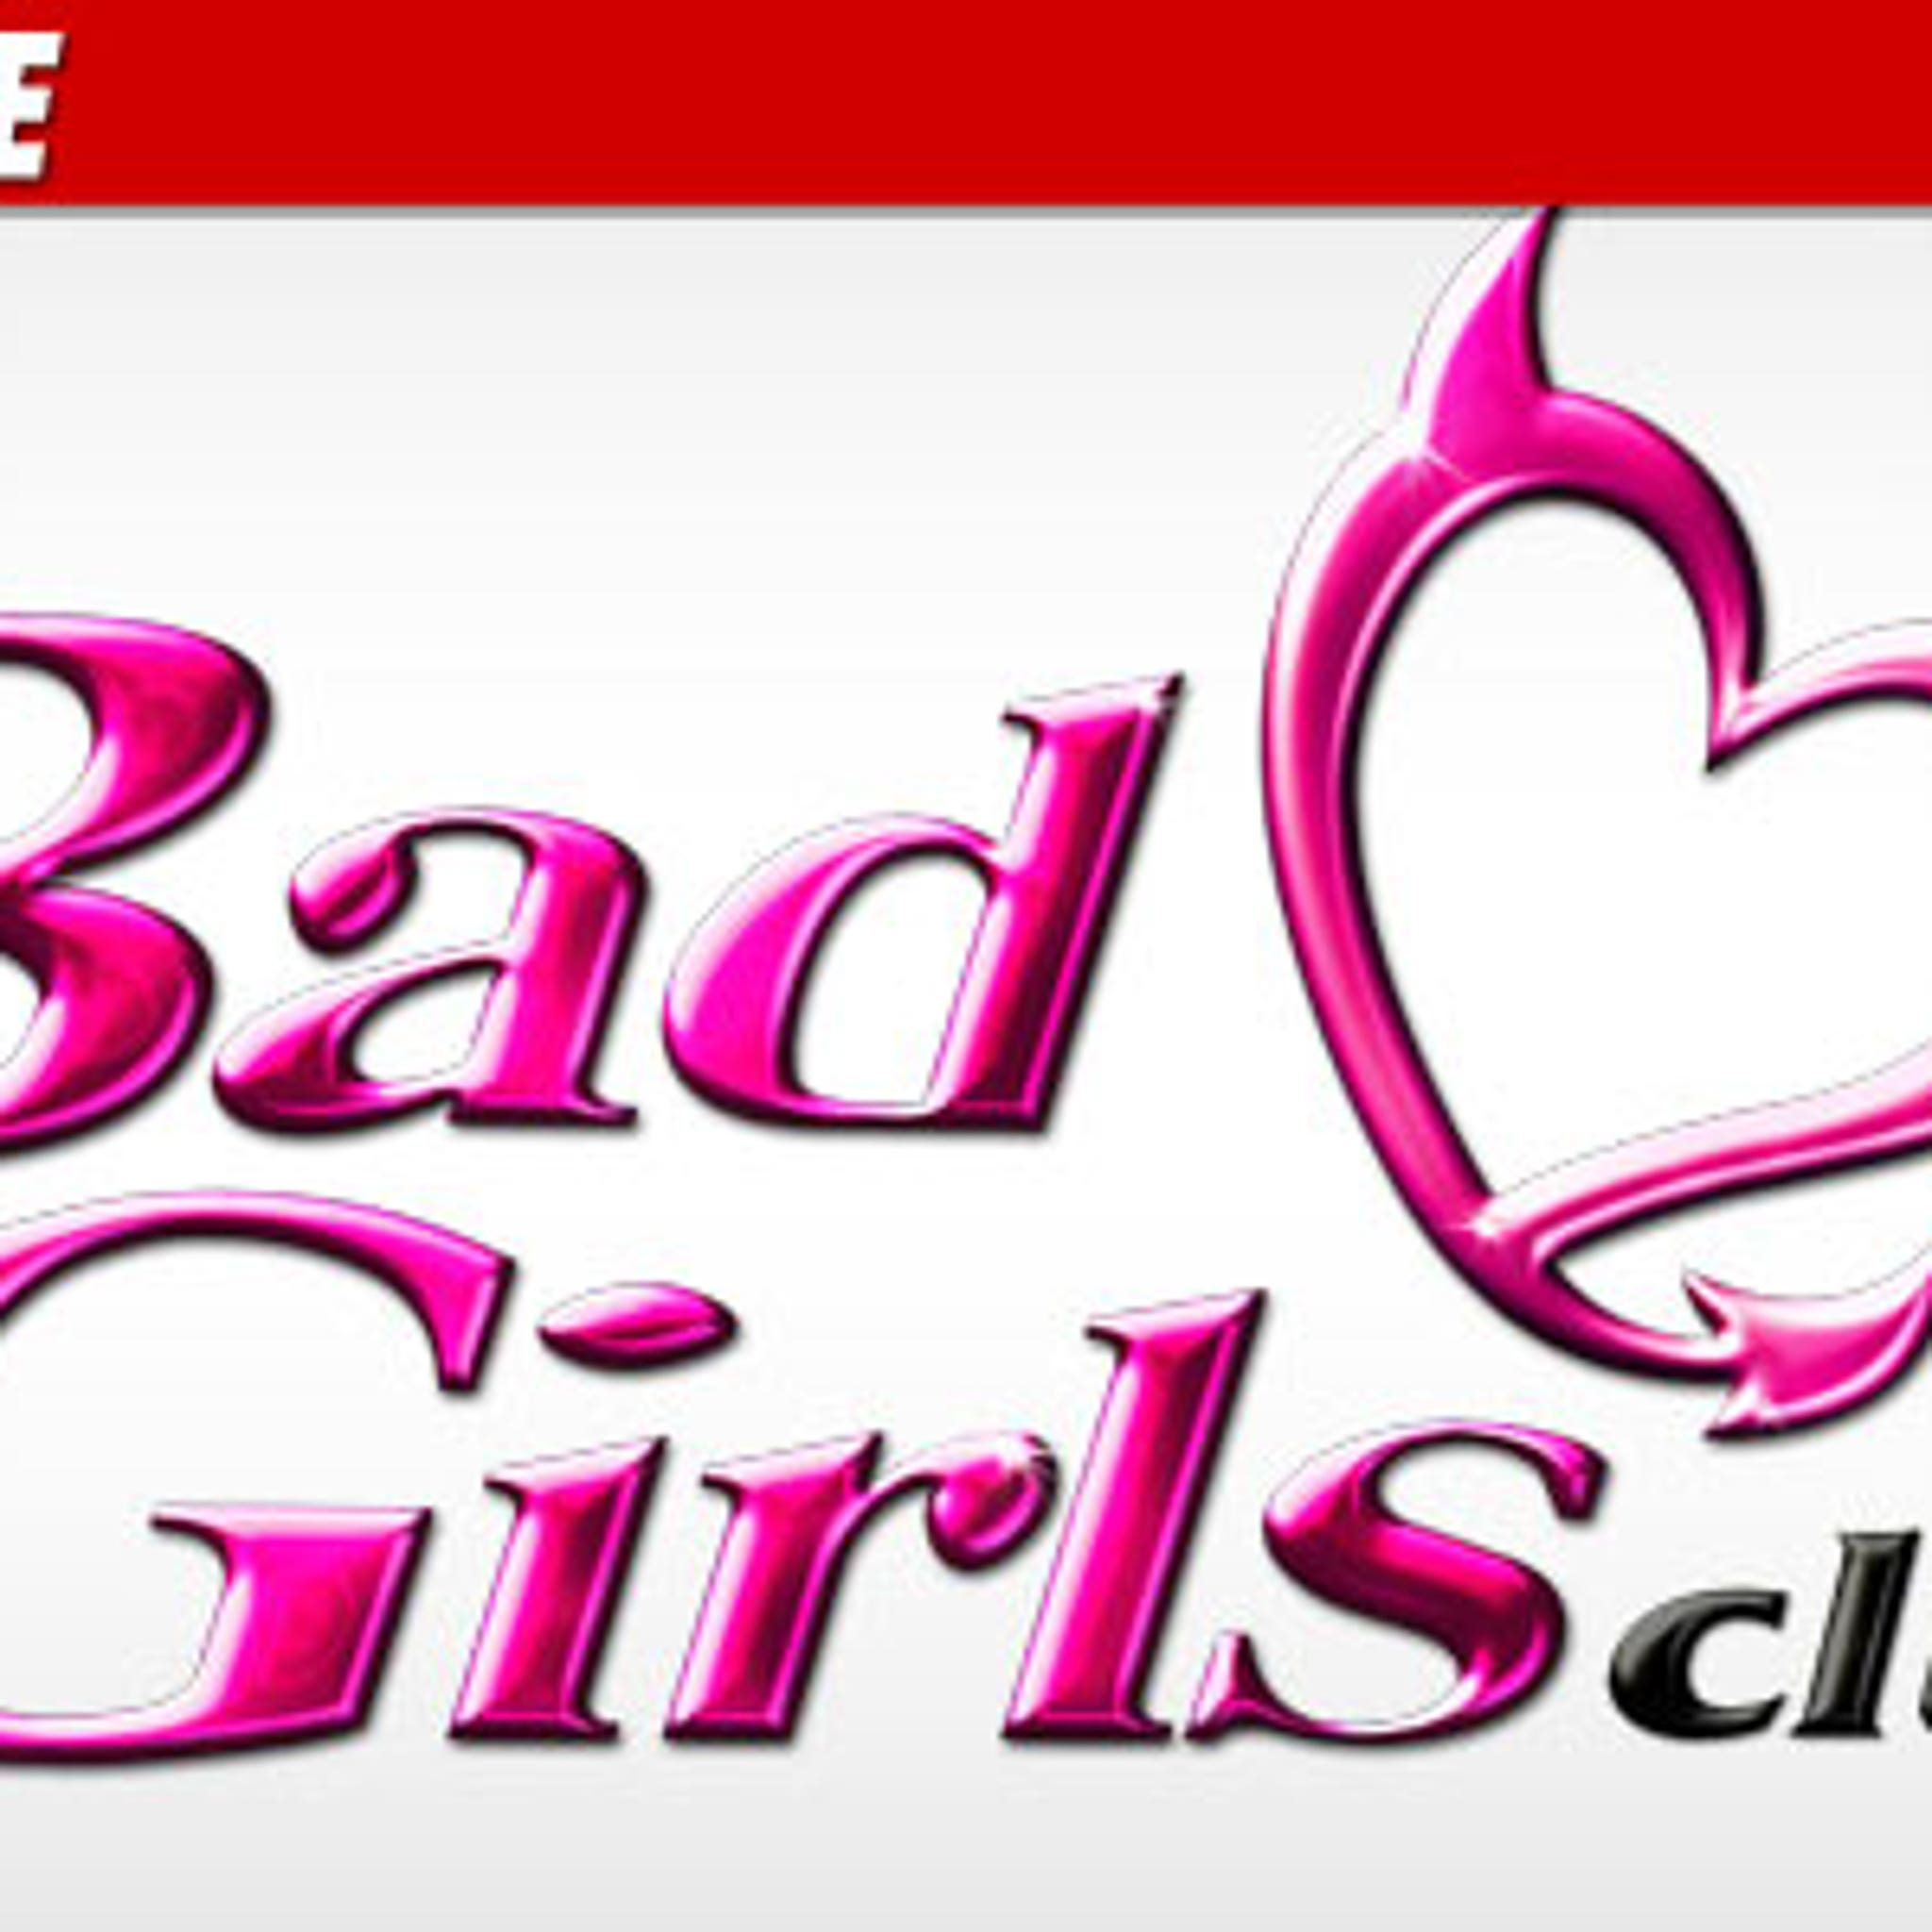 Bad Girls the Musical - SceneryProjections.com